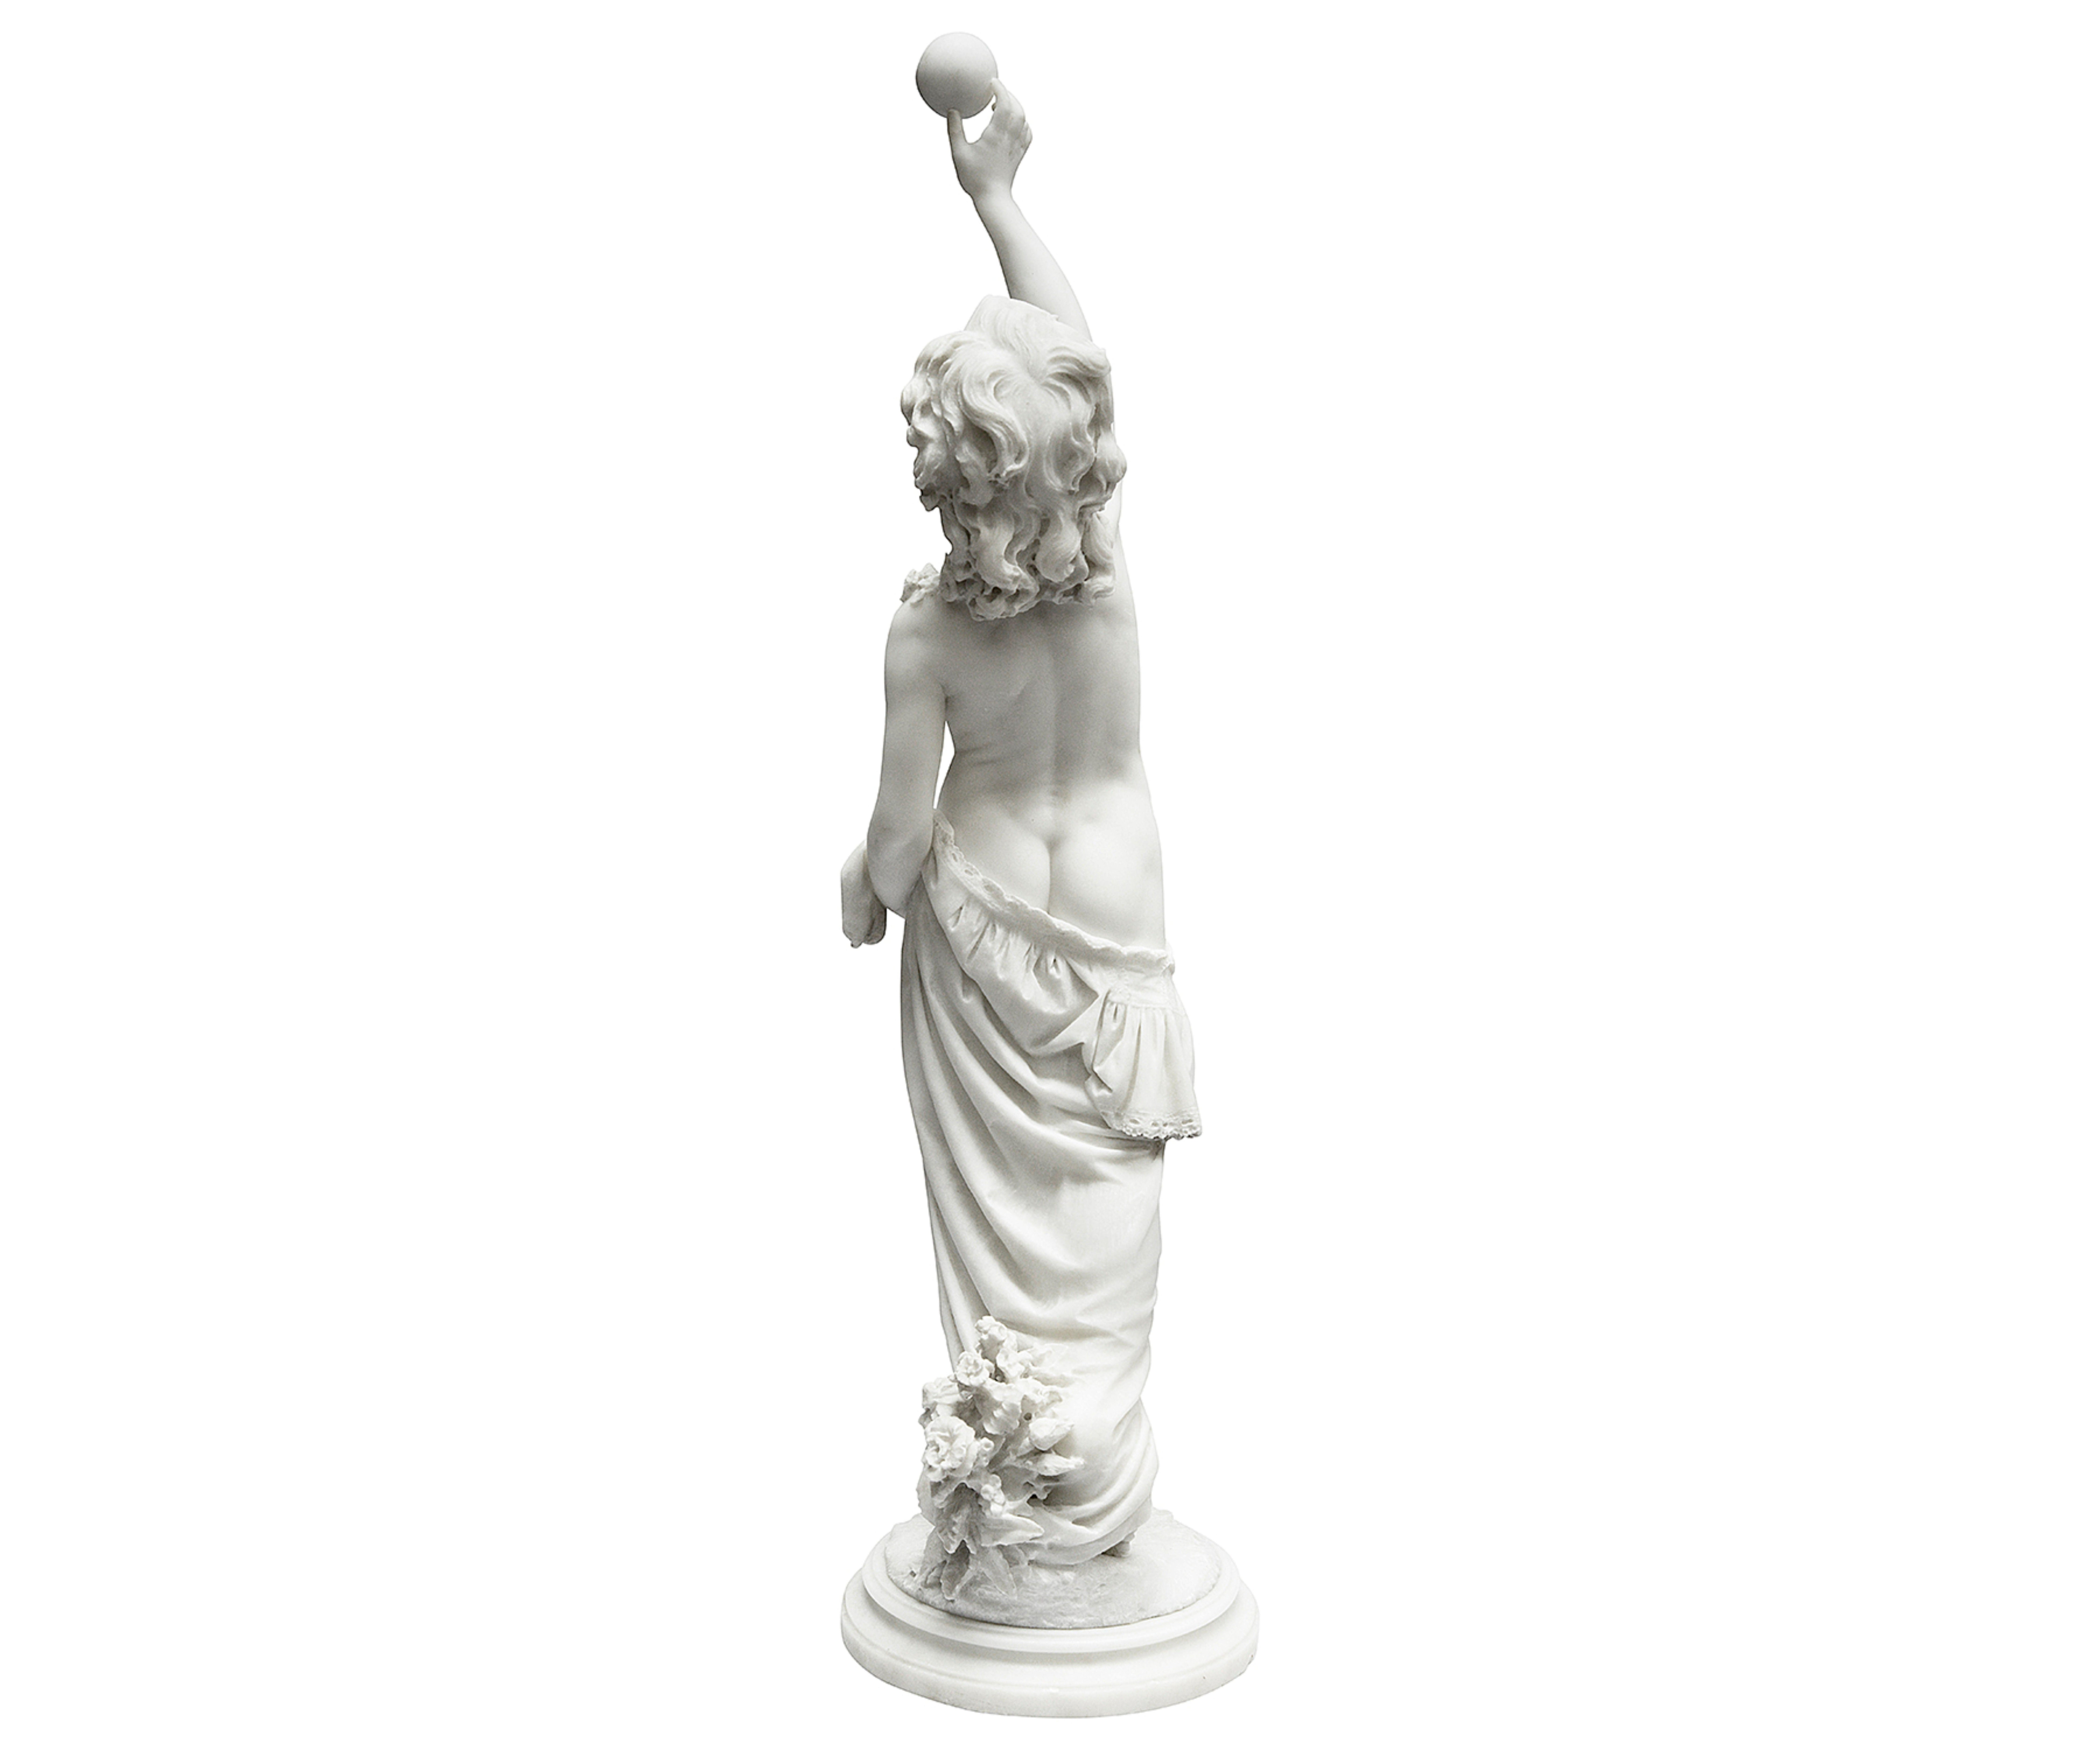 Romantic Enchanting marble statue of young girl playing ball, signed Donato Barcaglia